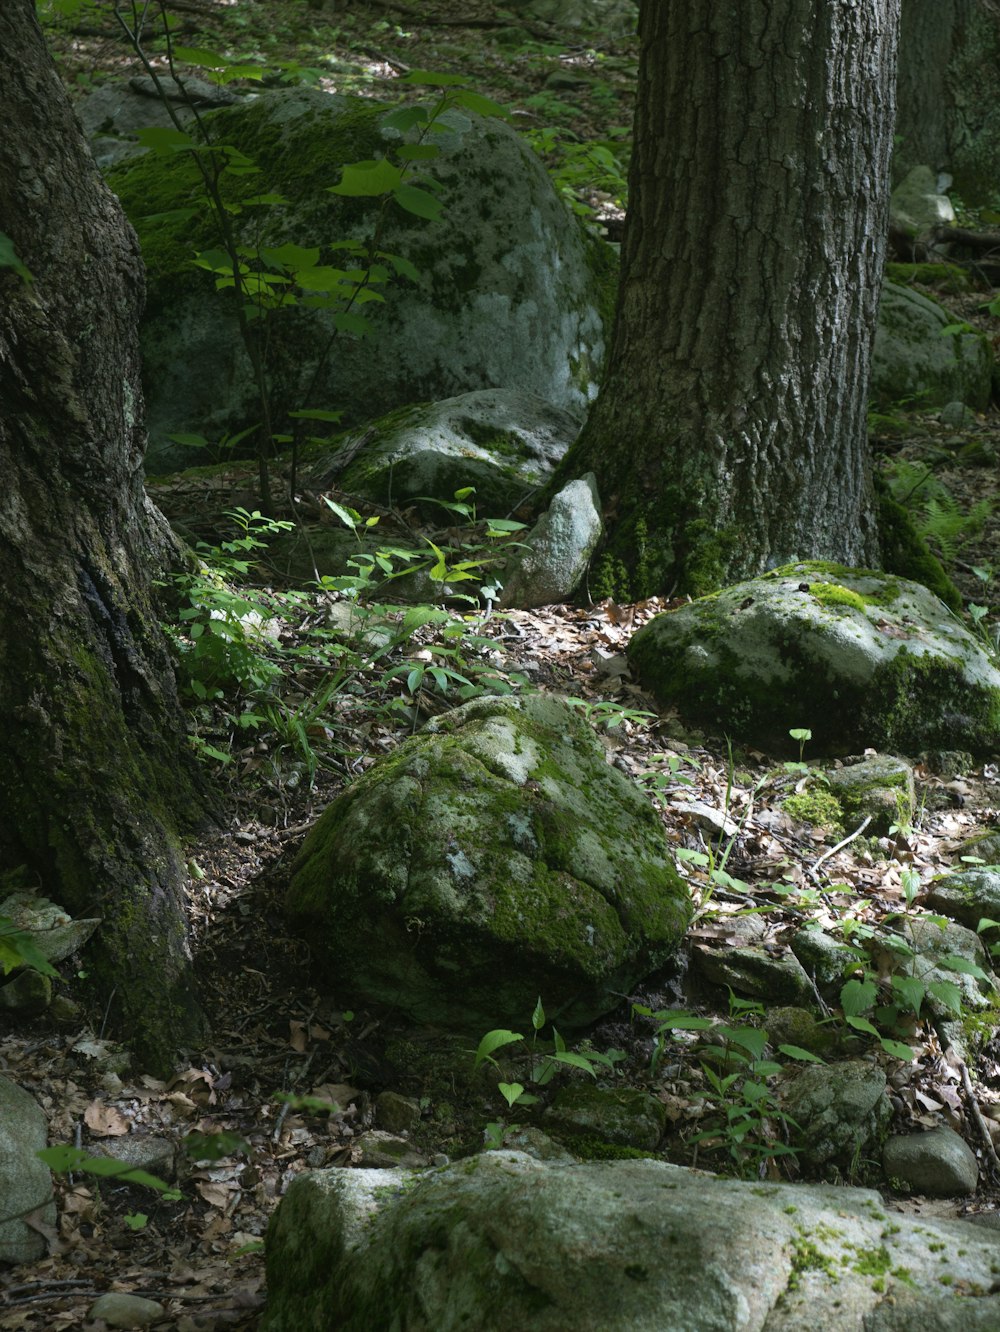 a bear is standing in the woods by some rocks